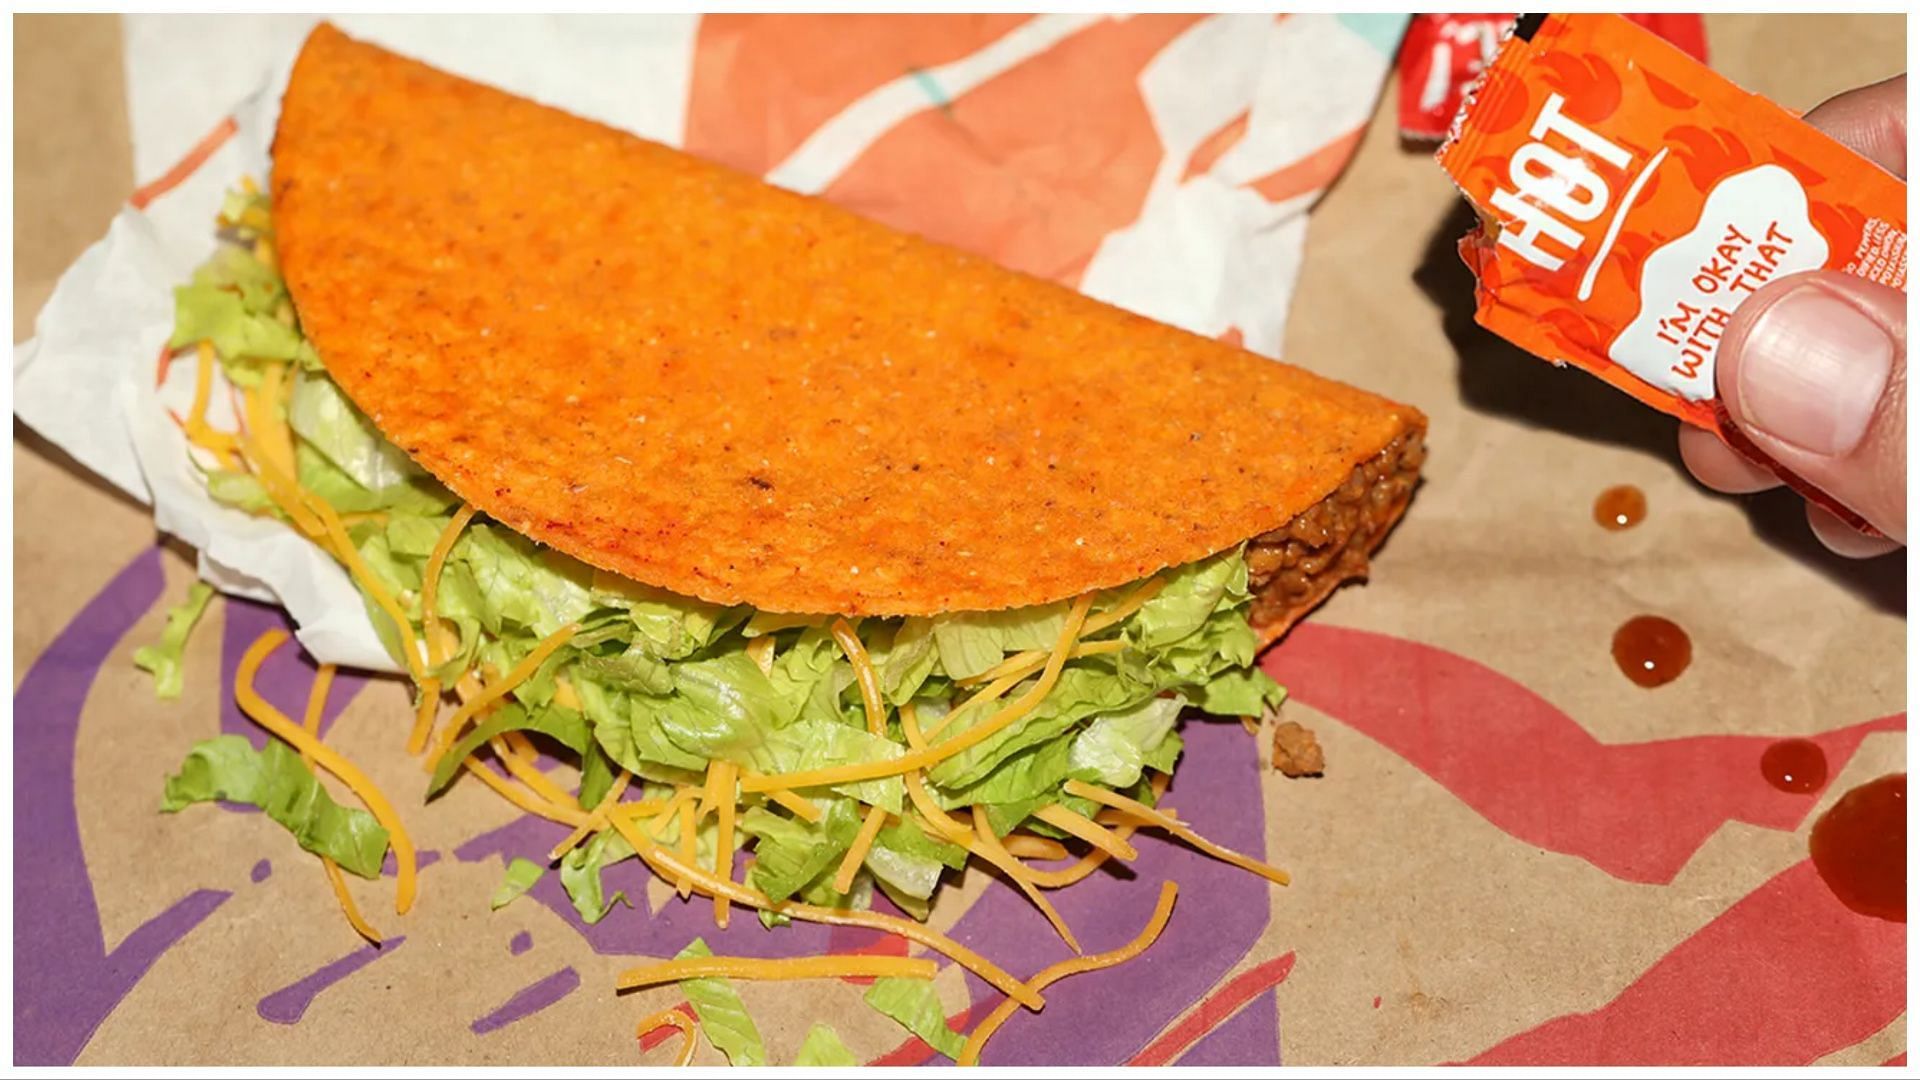 The brand is back with an enticing offer (Image via Taco Bell)